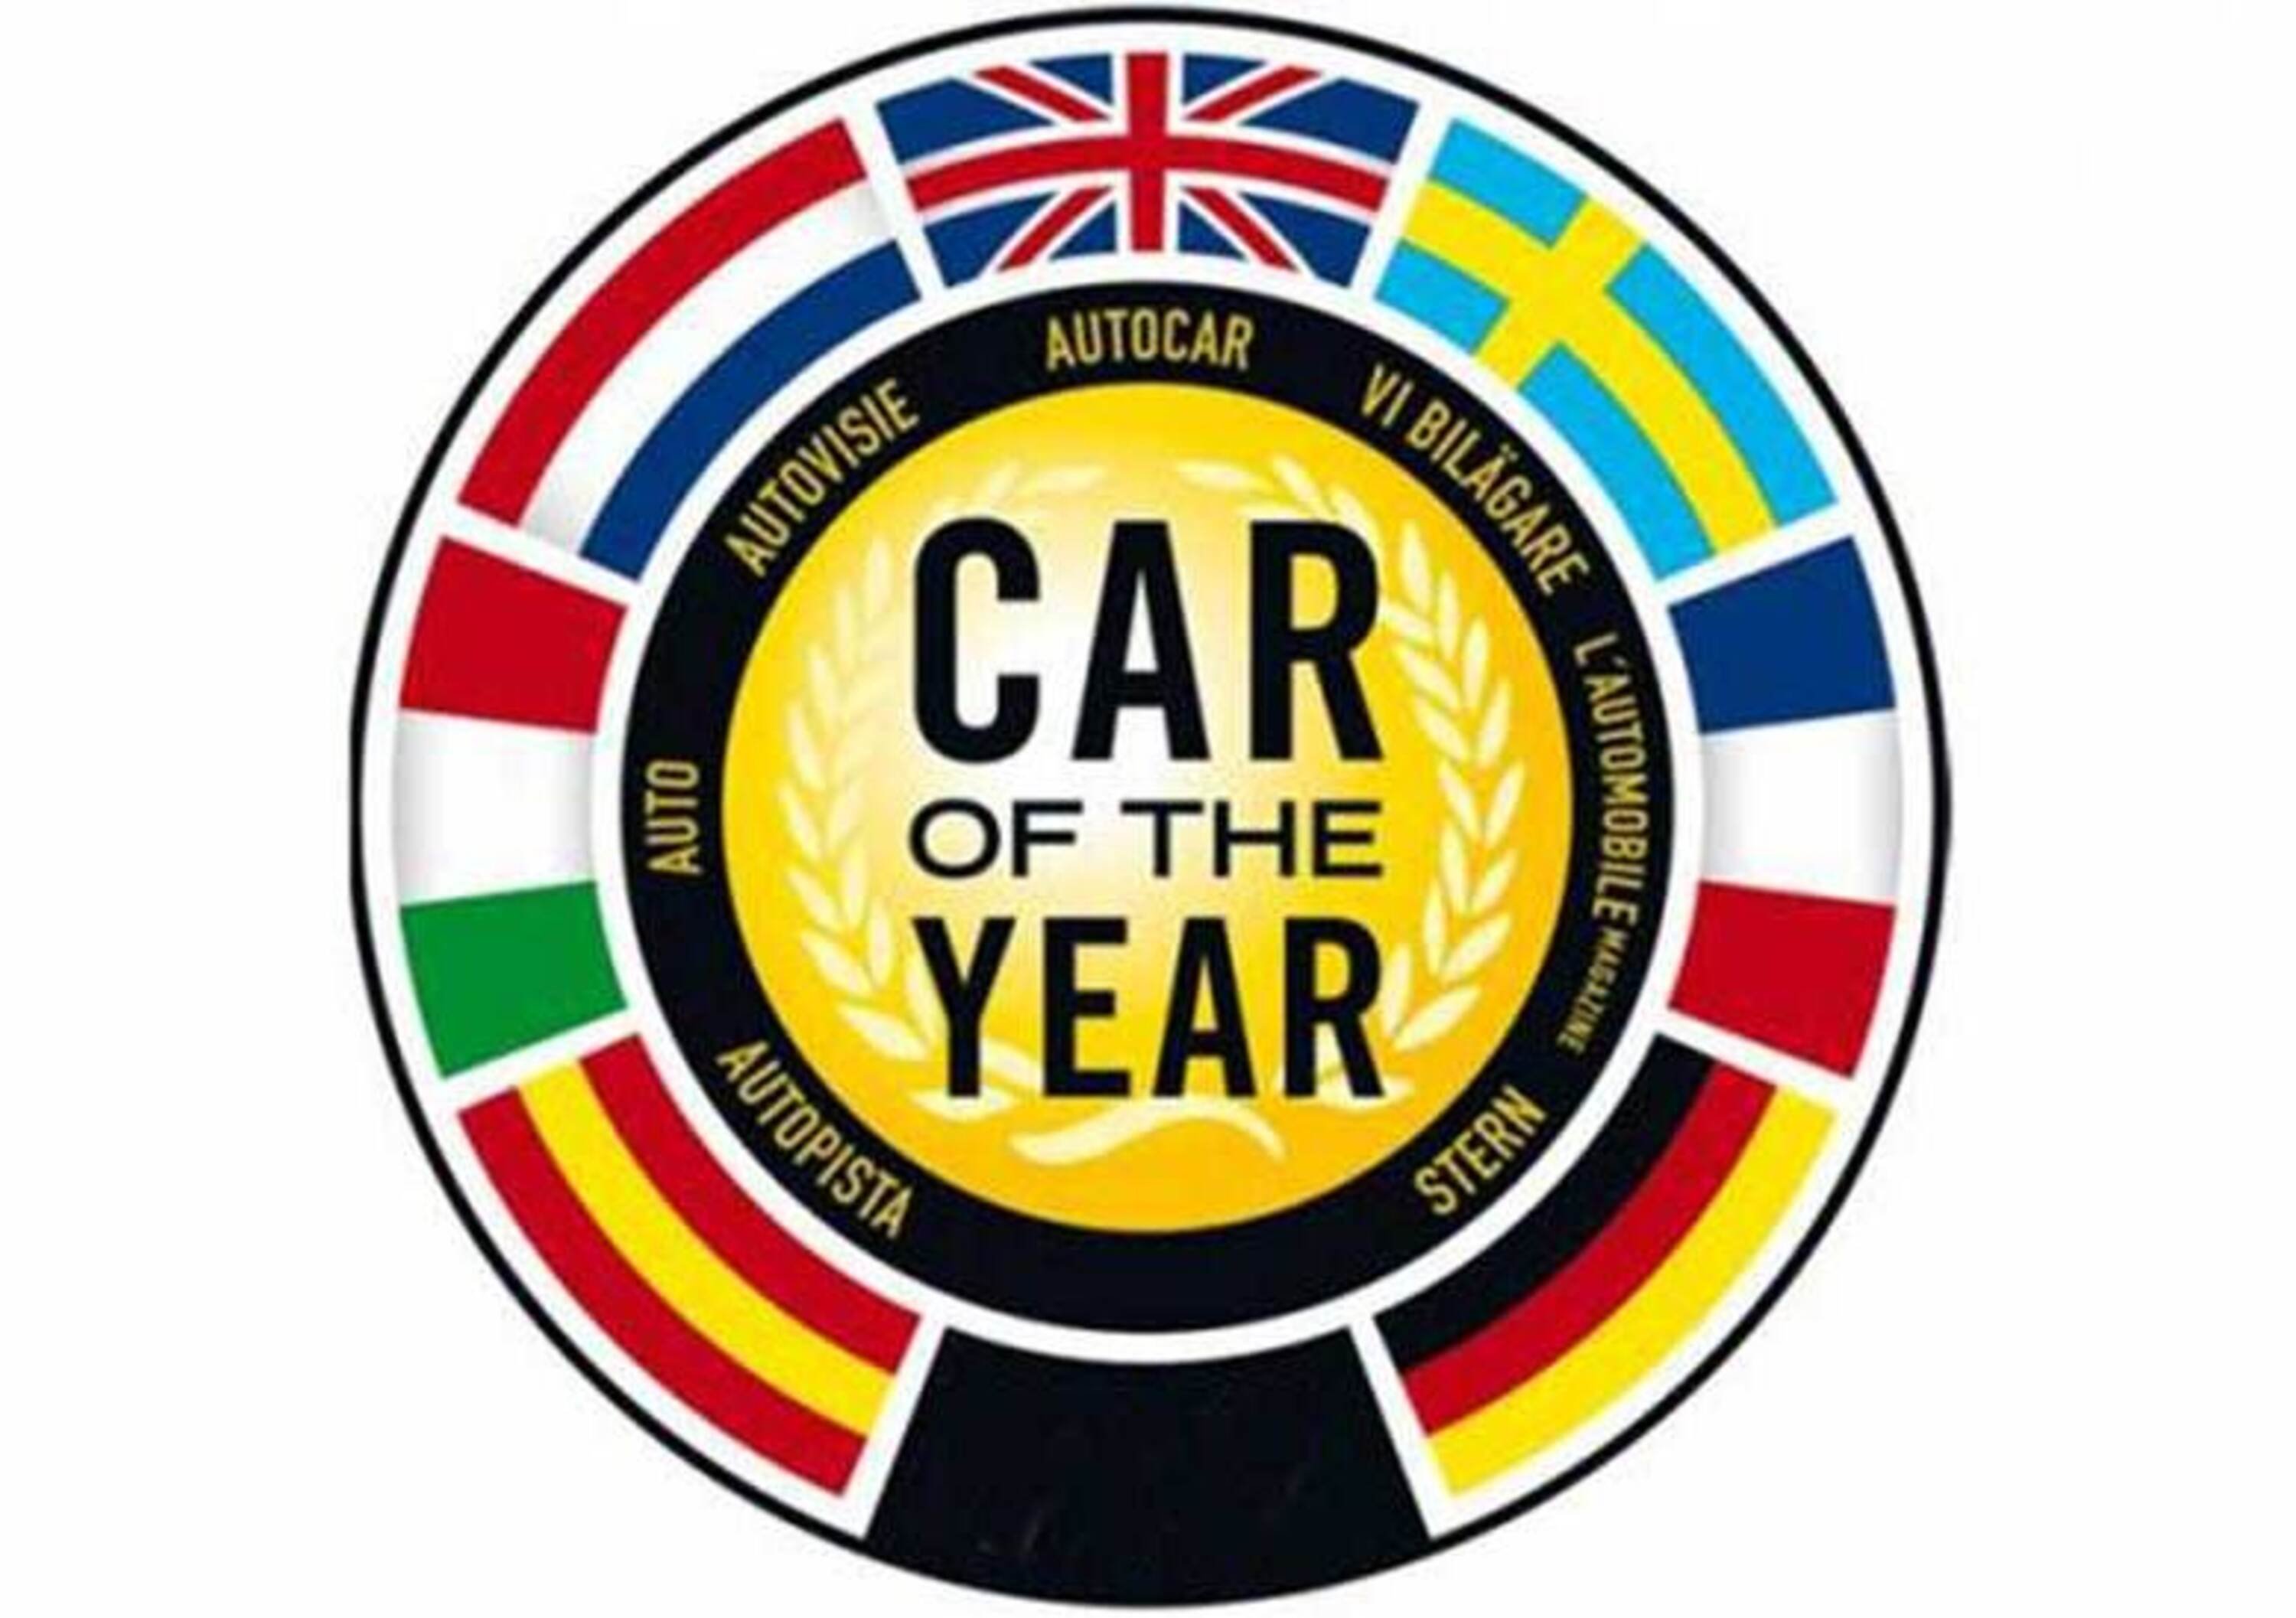 Car of The Year 2015: ecco chi sono le candidate